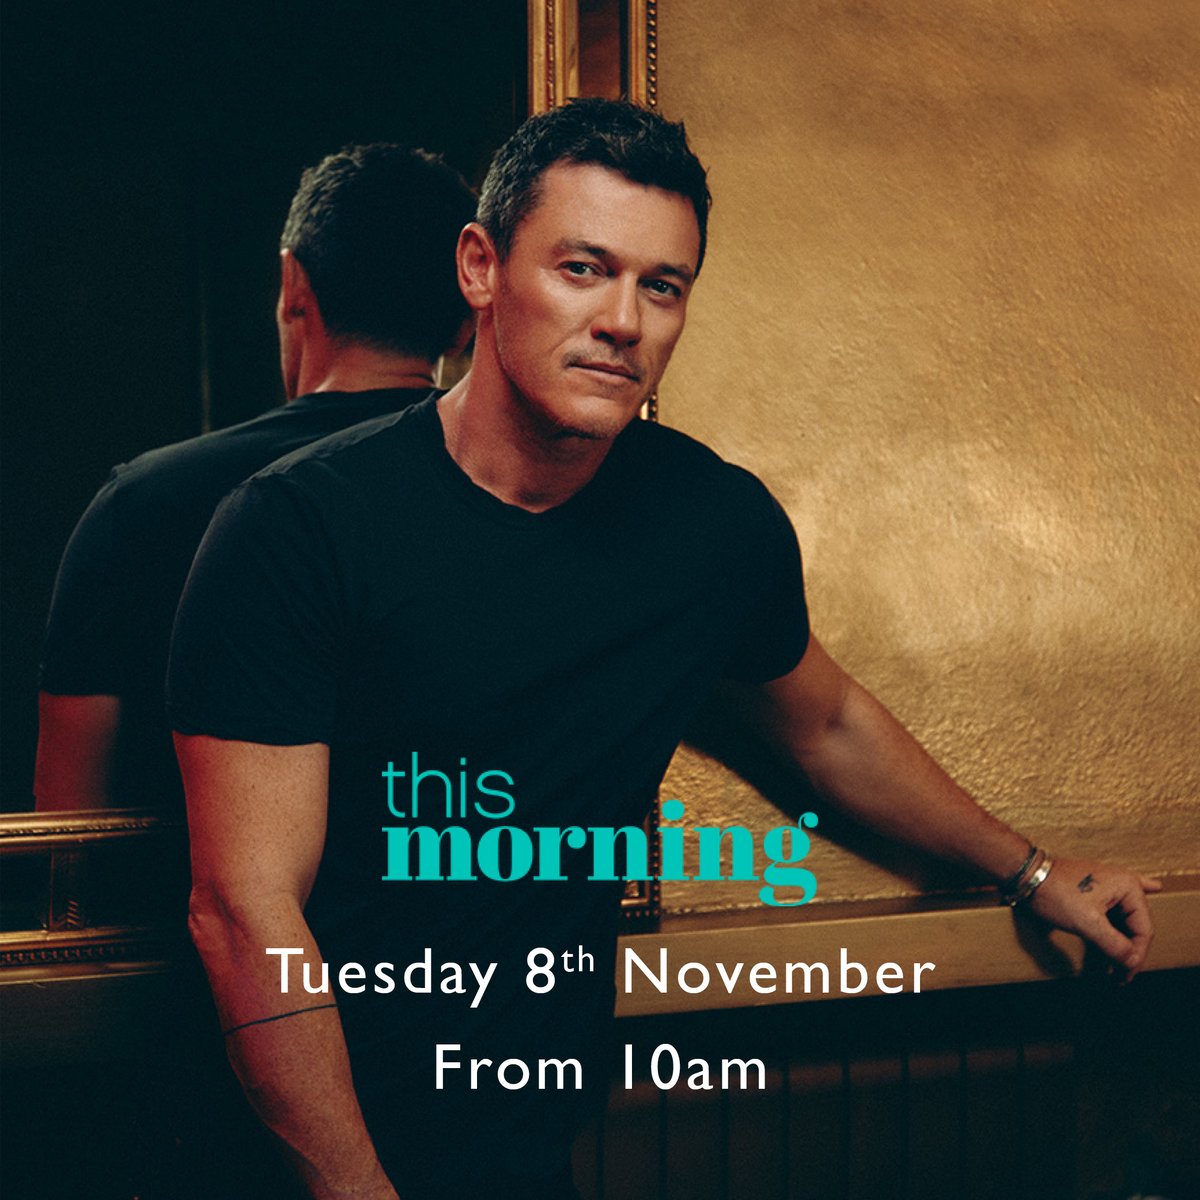 I'll be on @thismorning tomorrow talking about my new album, #ASongForYou, as well as performing a song from it! Tune into @ITV from 10am or watch online after. Listen to A Song For You here: lukeevans.lnk.to/asongforyoutw